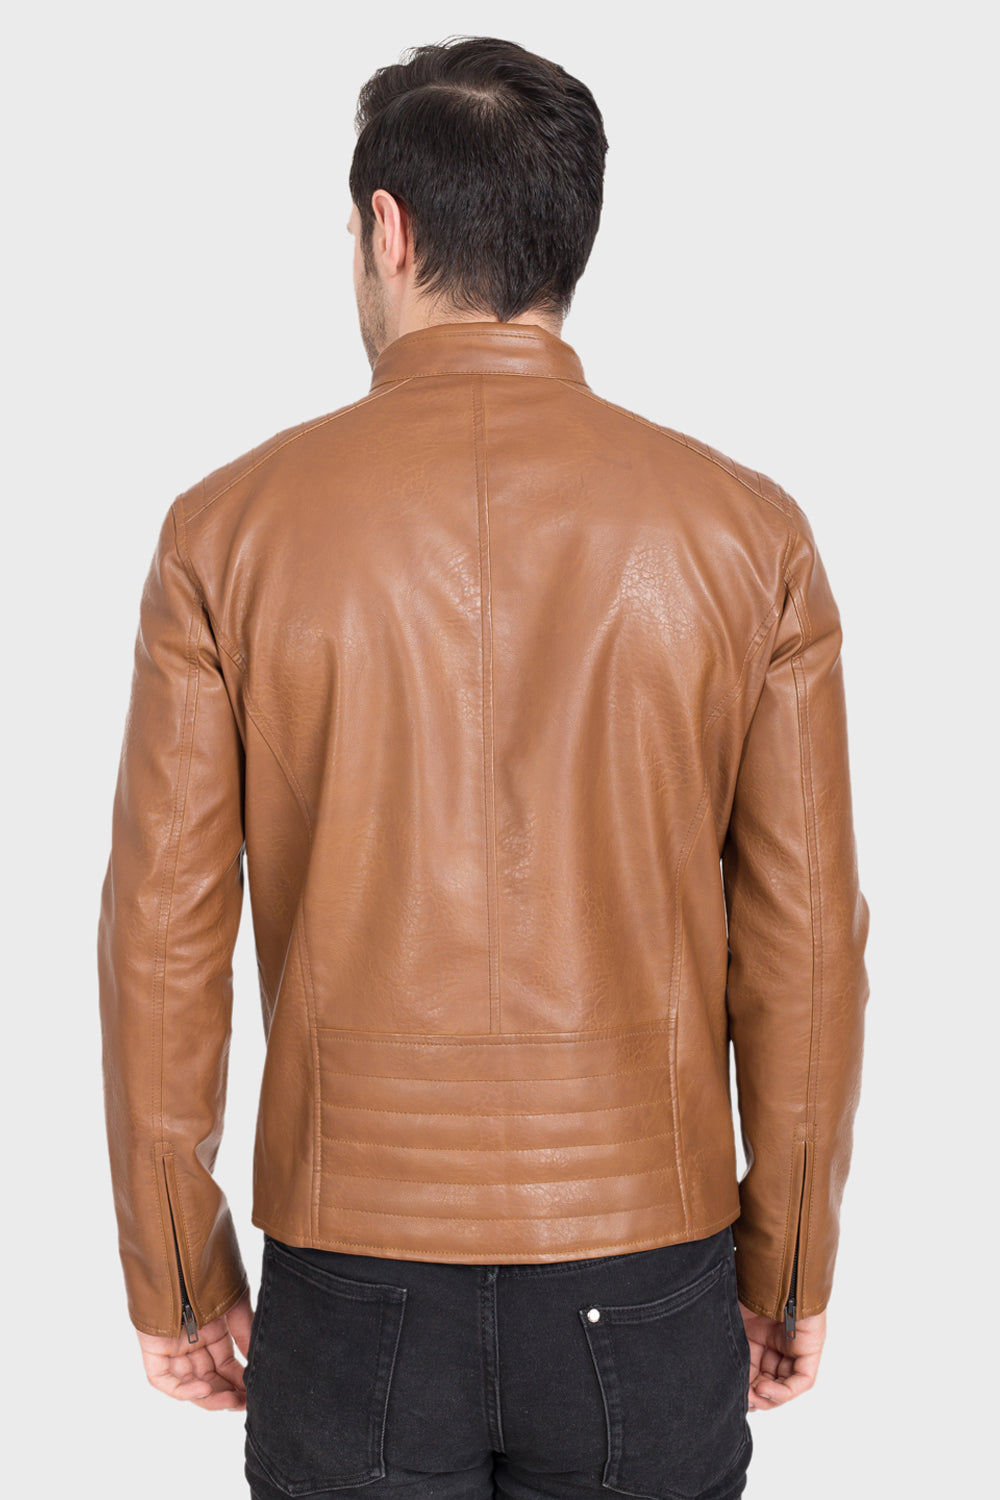 Justanned Ochre Brown Leather Jacket